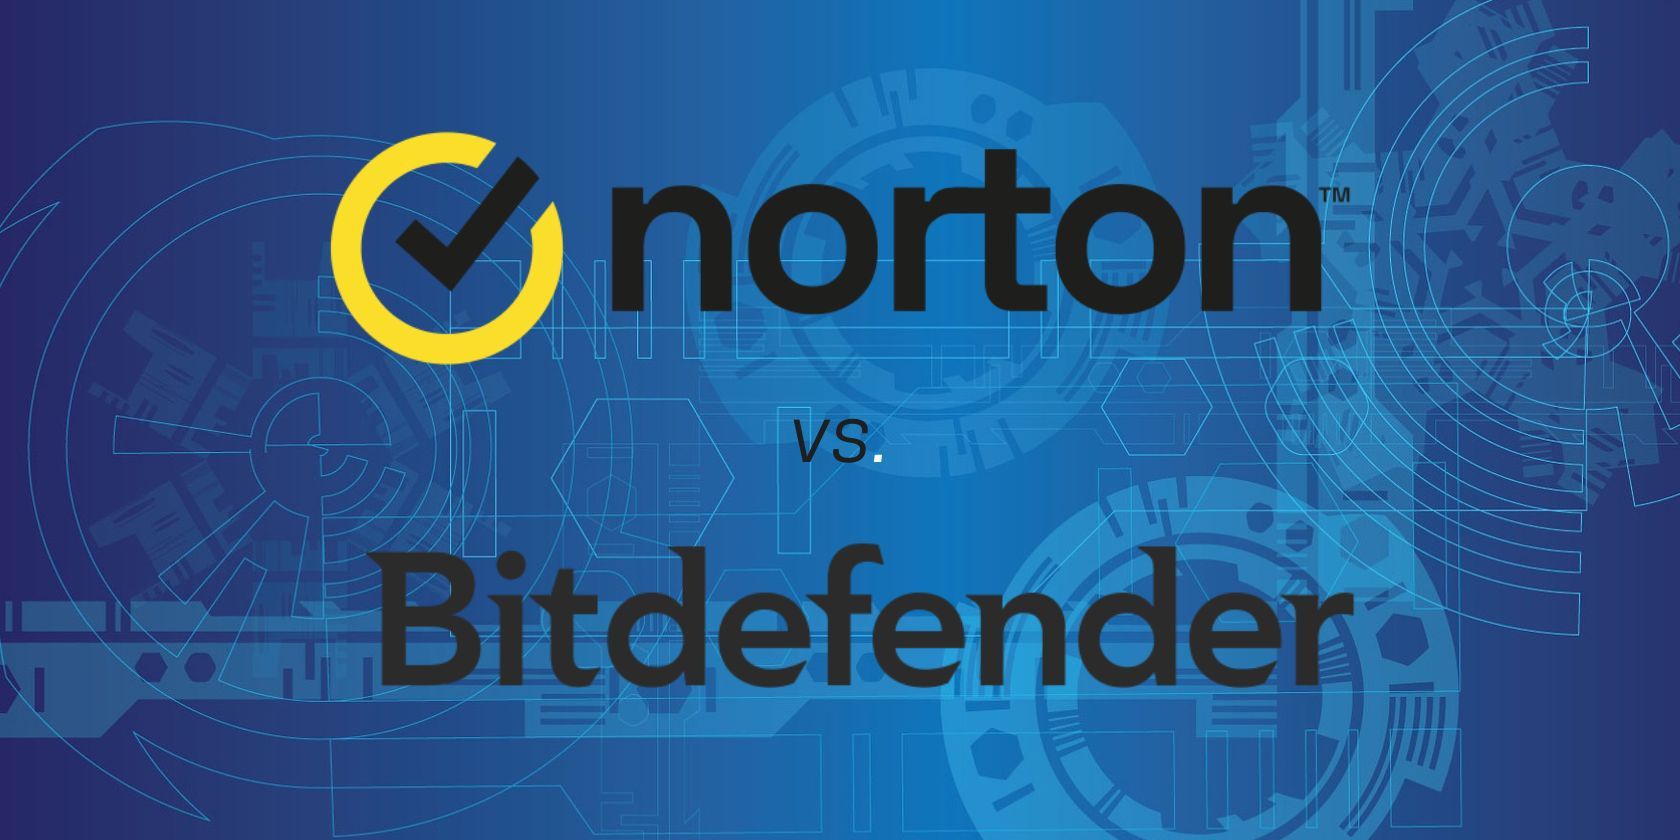 Norton vs. Bitdefender: Which Security Suite Will Protect Your PC Best?